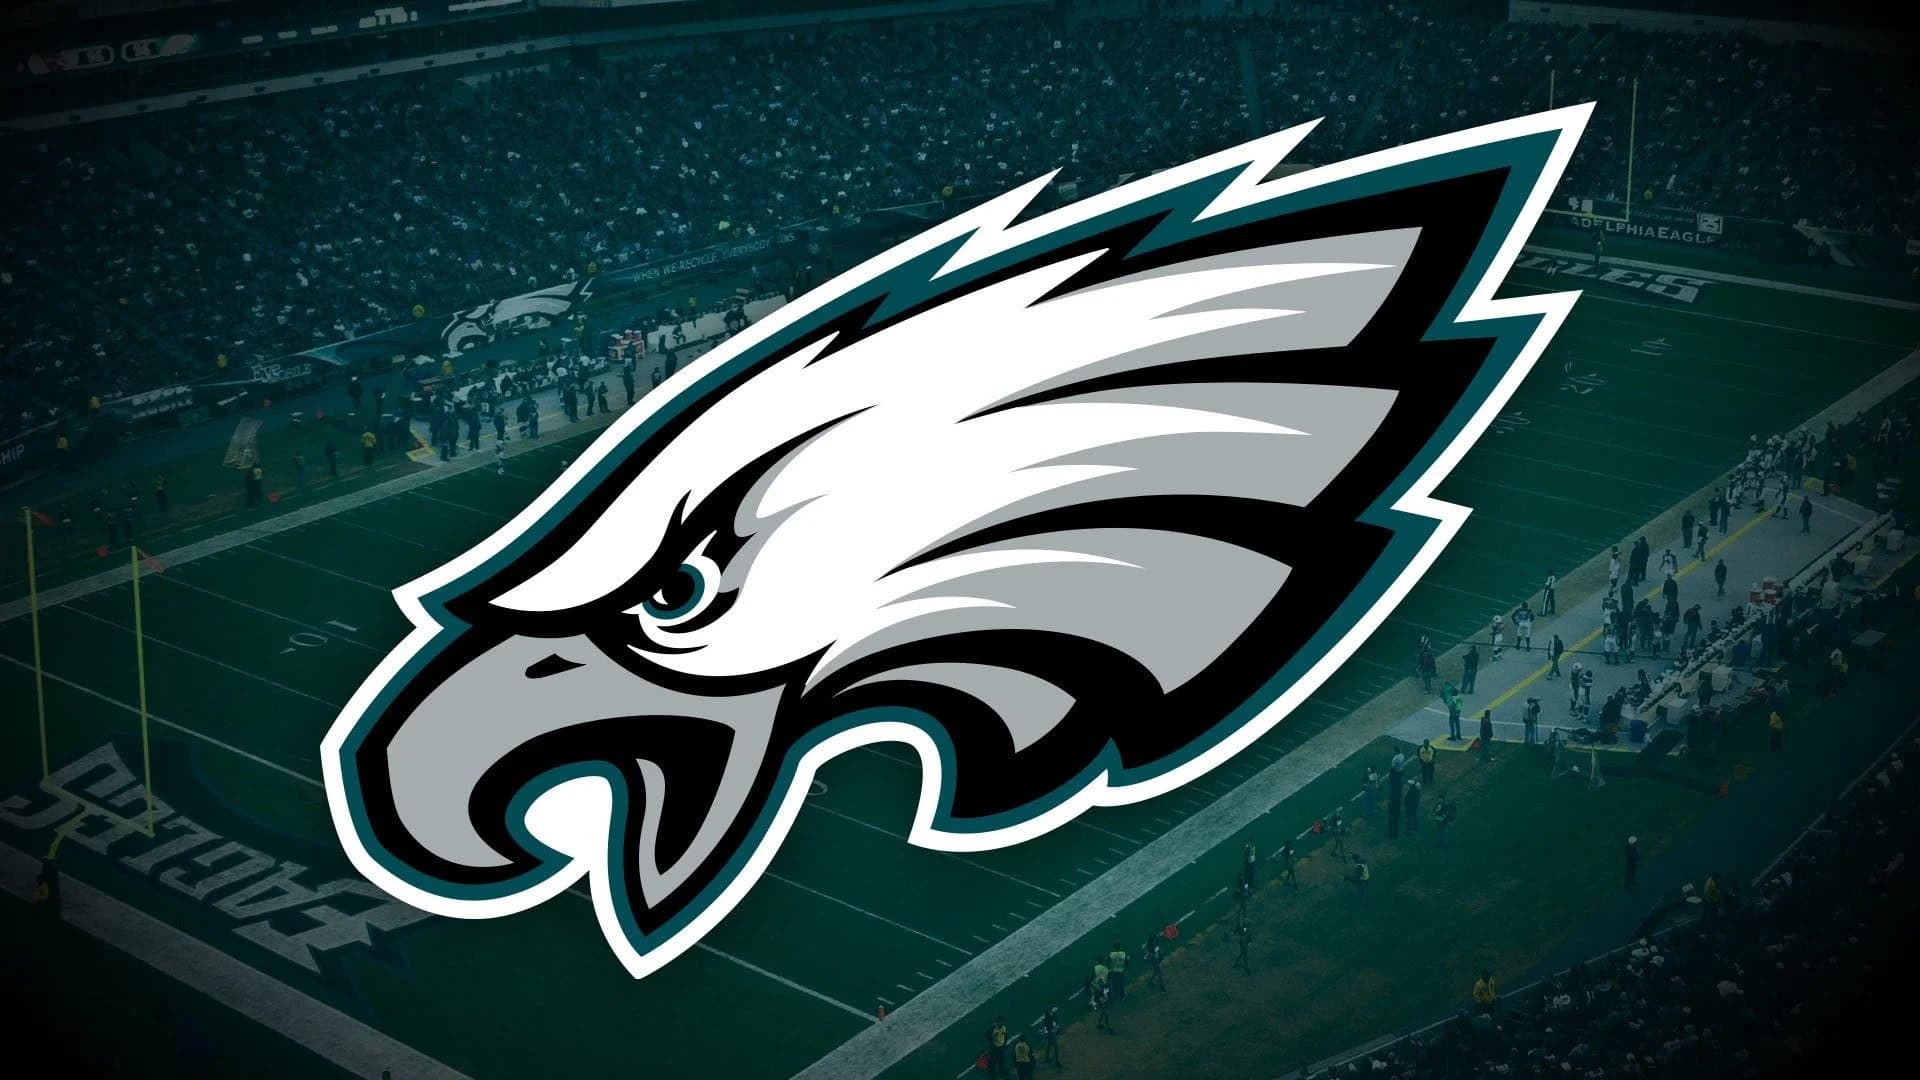 Police: Irate Eagles fan put girlfriend's dog in microwave